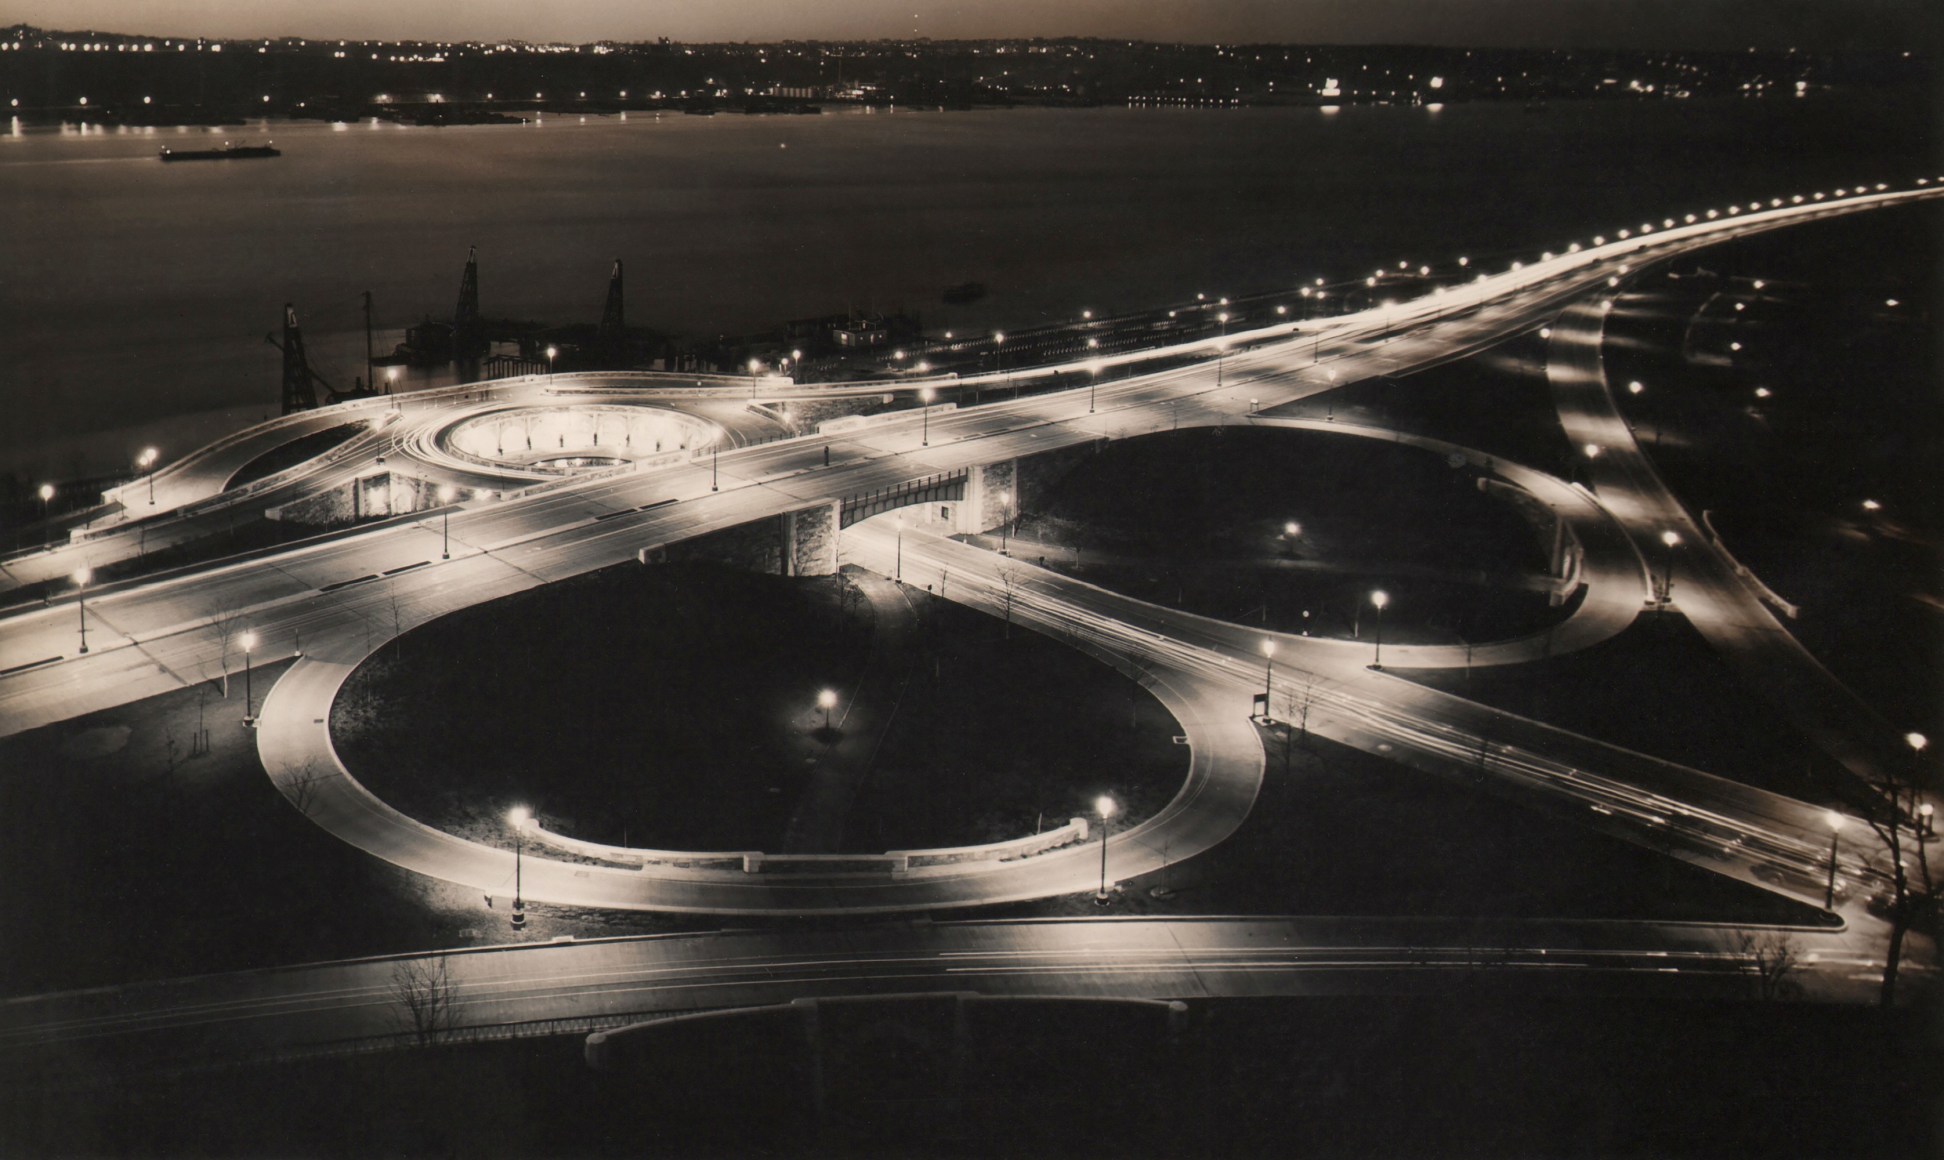 Paul J. Woolf, 86th Street Clover Leaf at Night, ​c. 1935. Night time view of riverside street with circular on- and off-ramps.